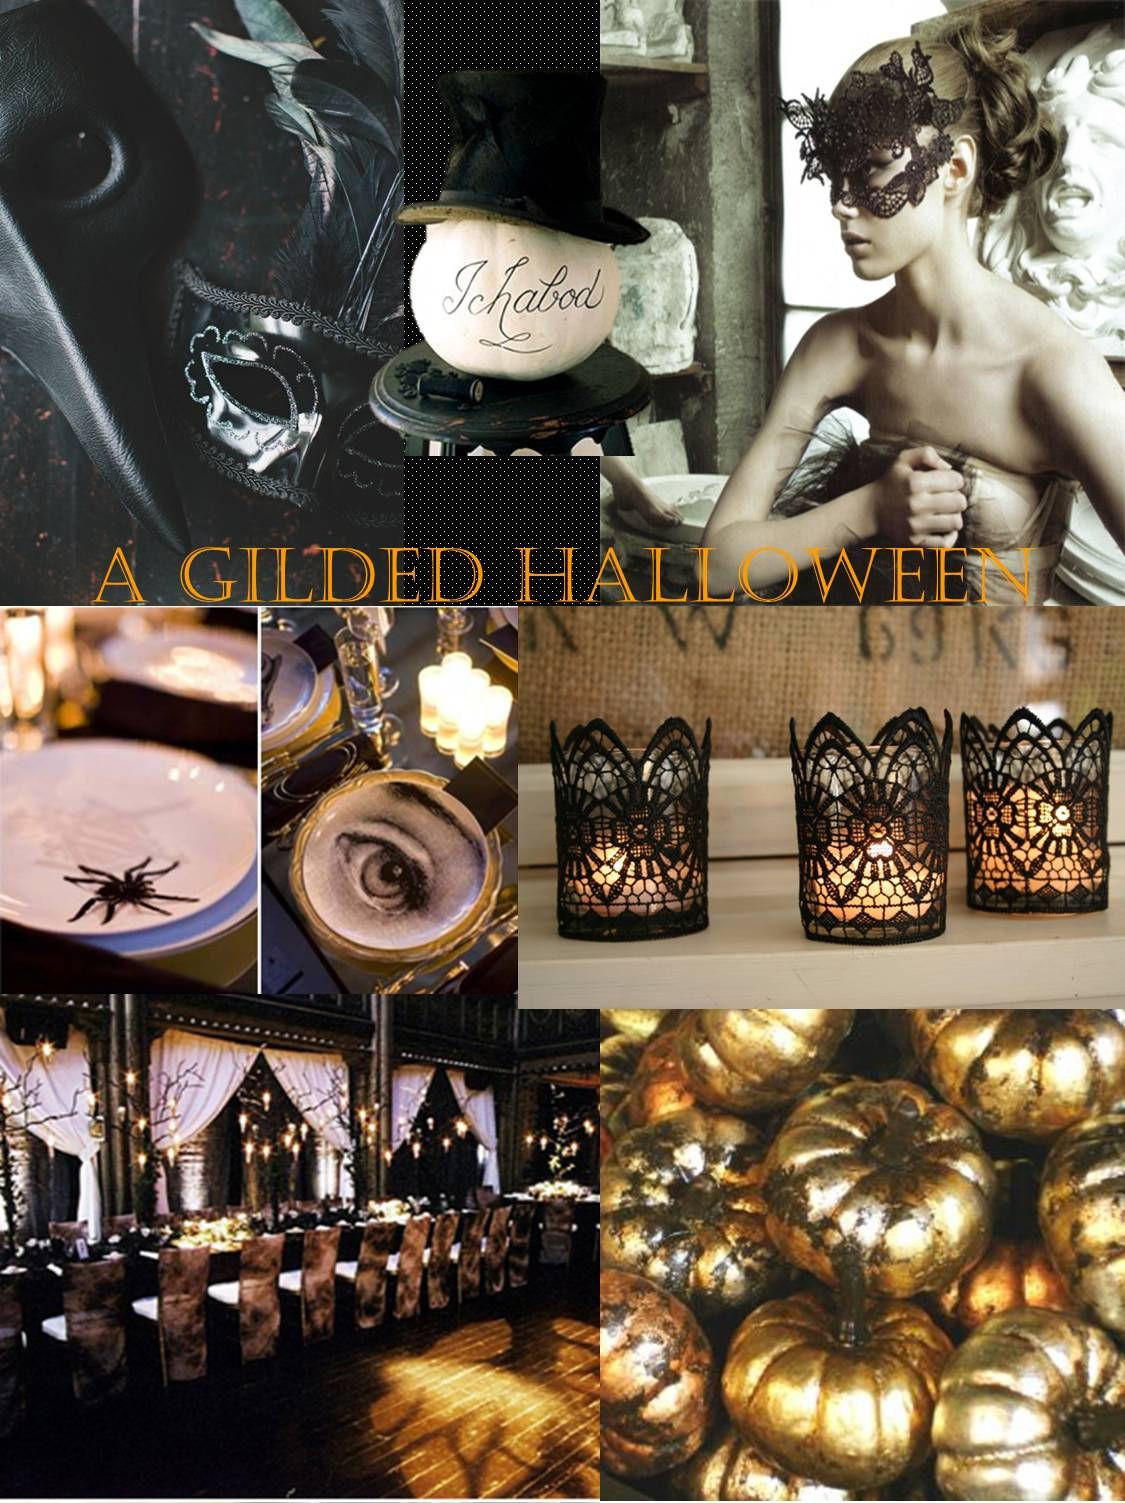 Halloween Masquerade Party Ideas
 rivernorthLove A Gilded Halloween in 2019